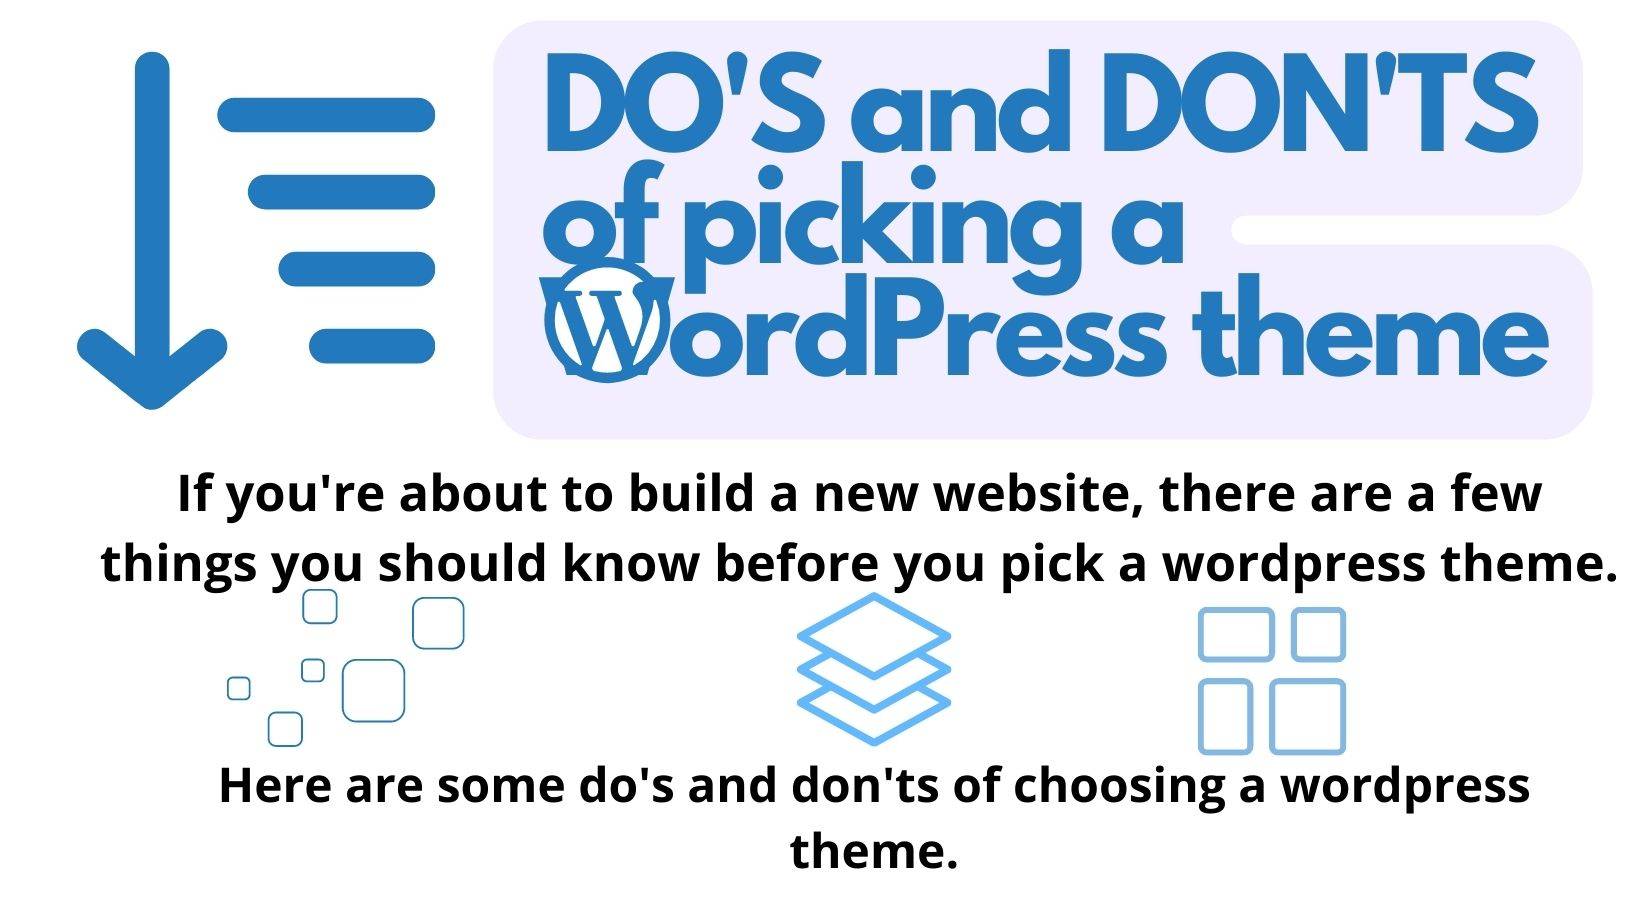 do's and don'ts of picking a wordpress theme